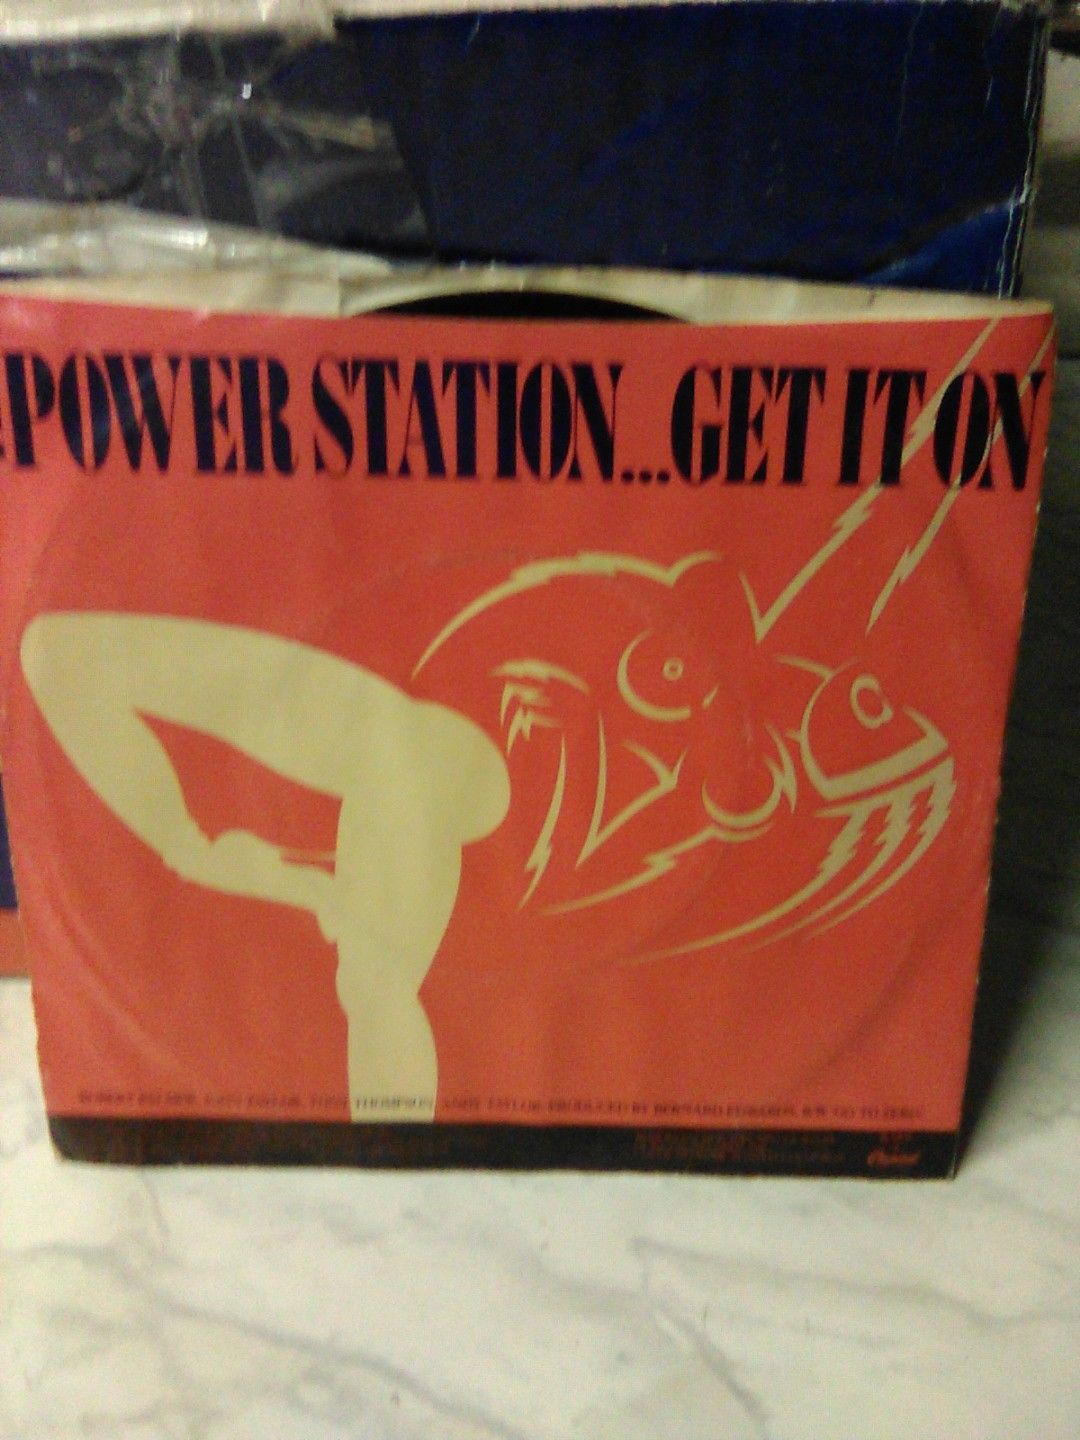 The power station get it on 45 RPM